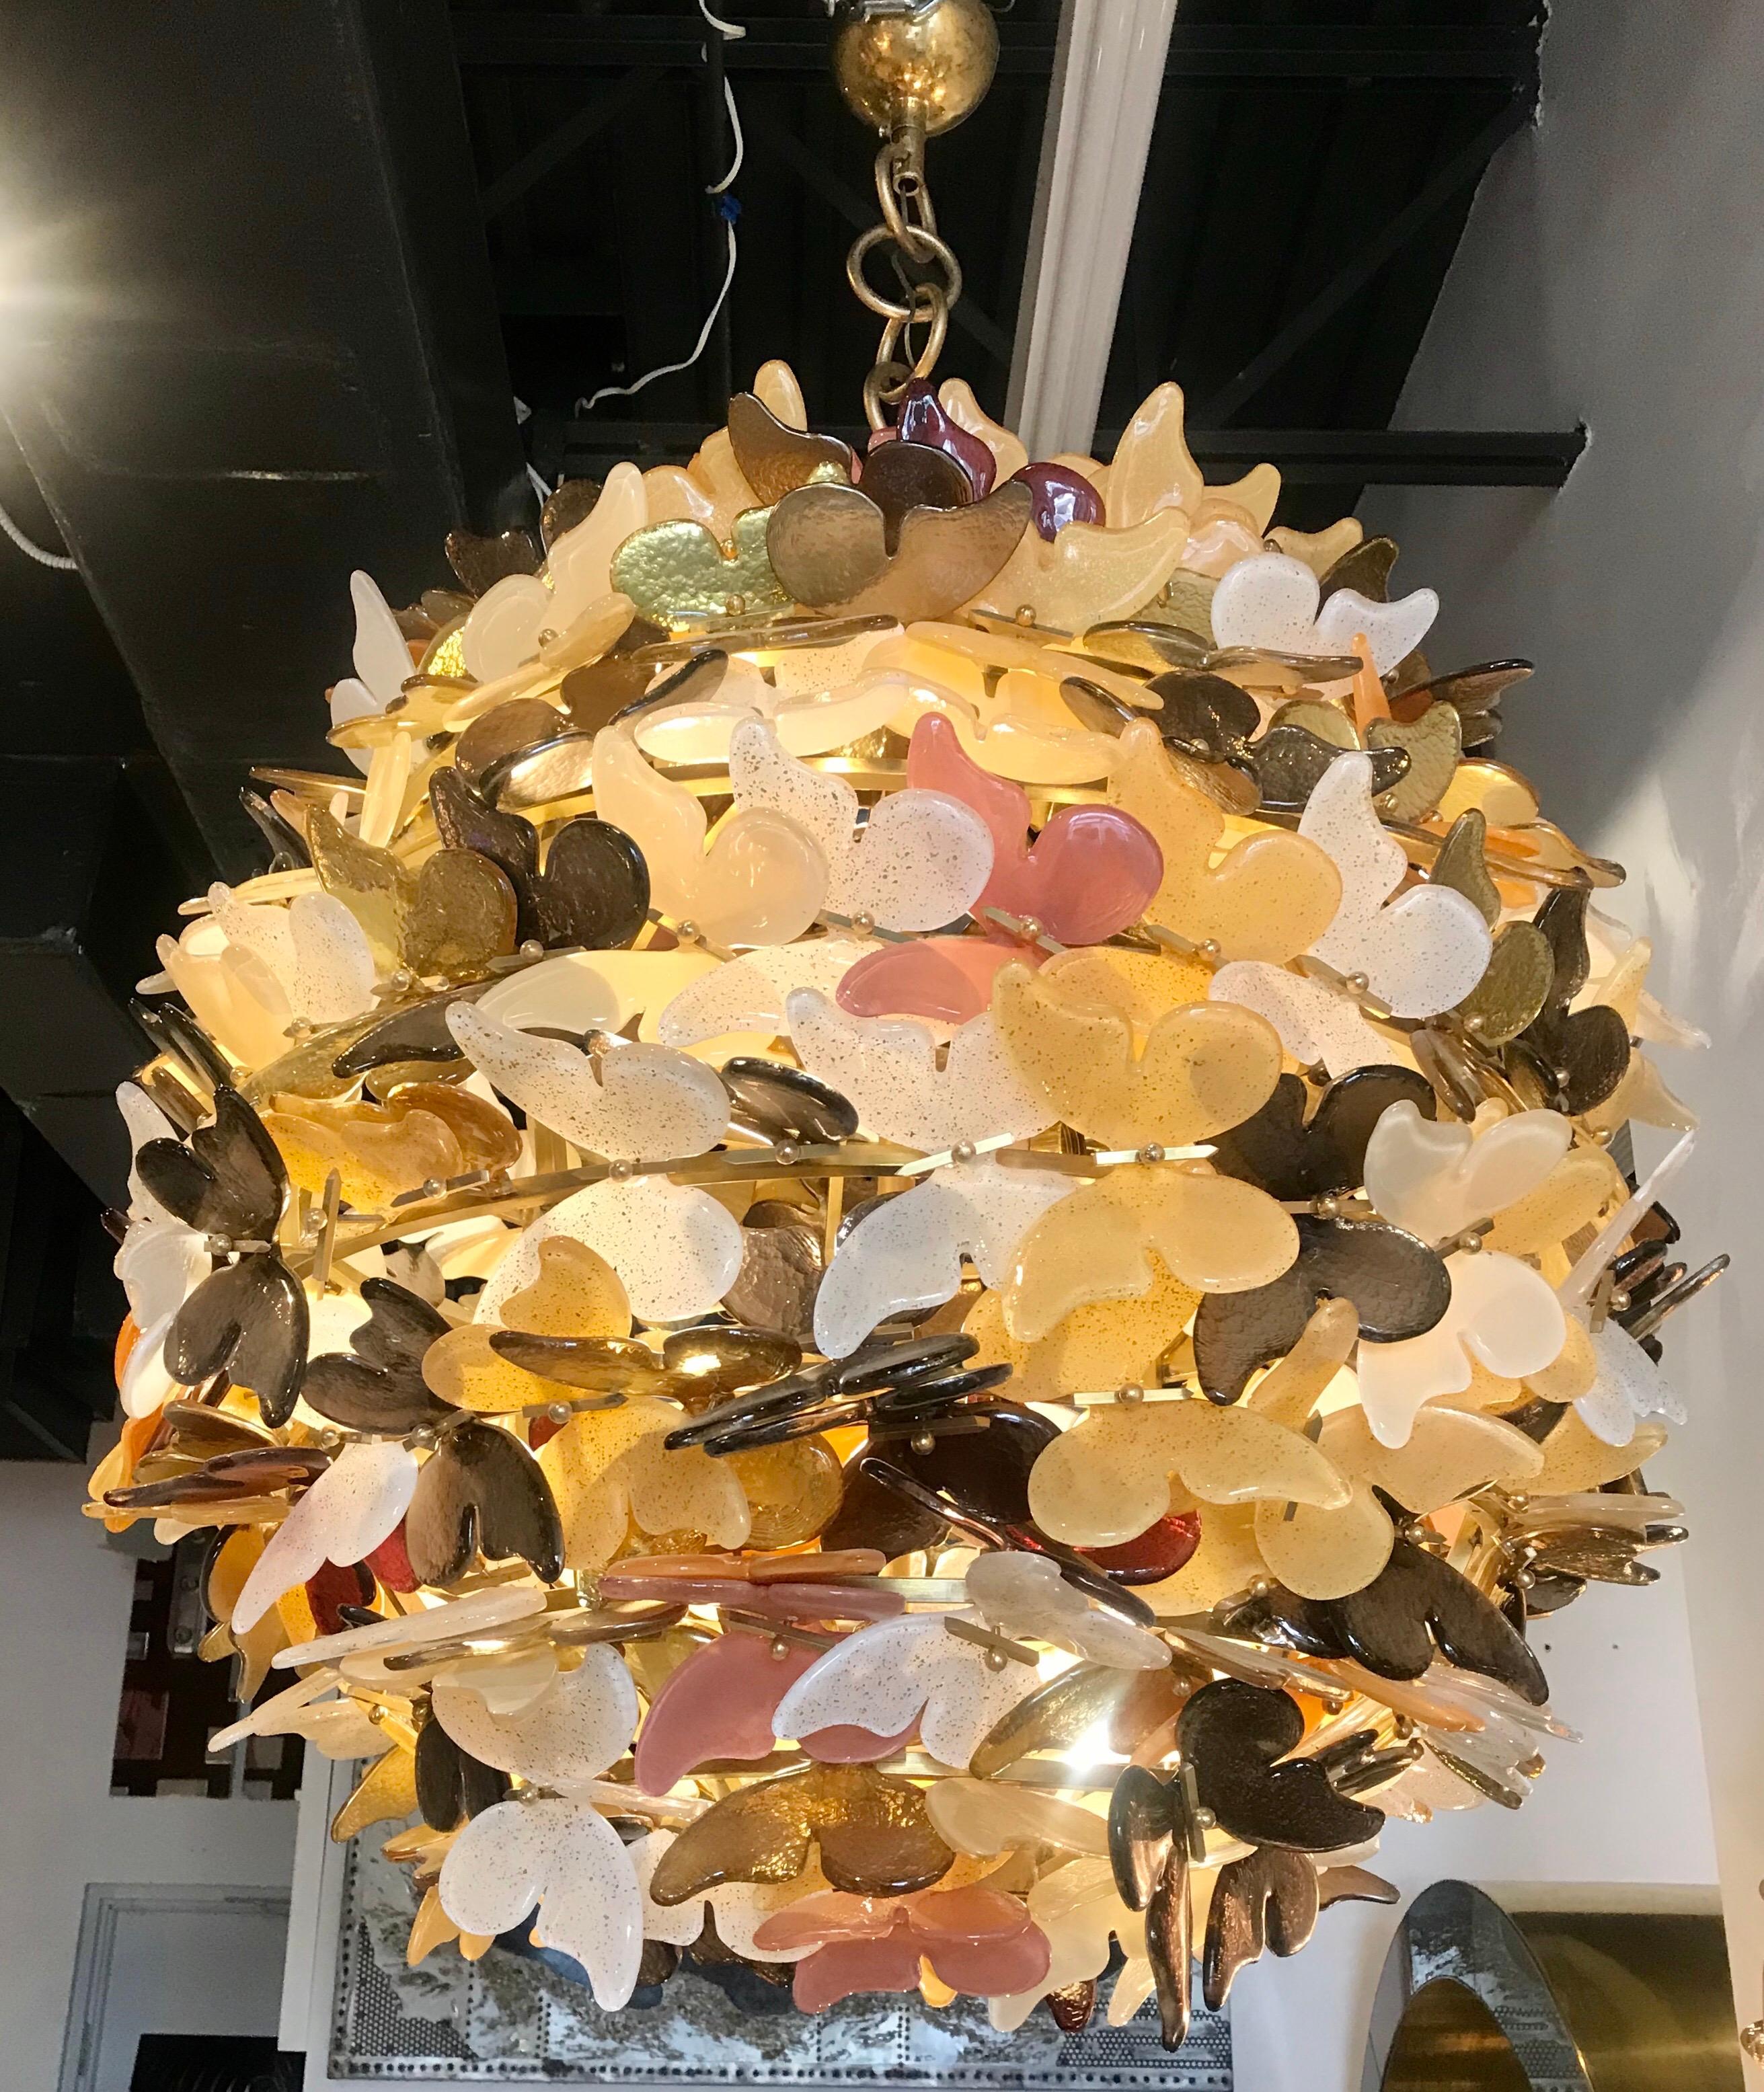 A large breathtaking Murano glass Italian globe chandelier that was rewired in Italy. Each butterfly is unique and some have gold inclusions creating a beautiful array of color and texture. The butterflies are poised on a brass globe and look as if